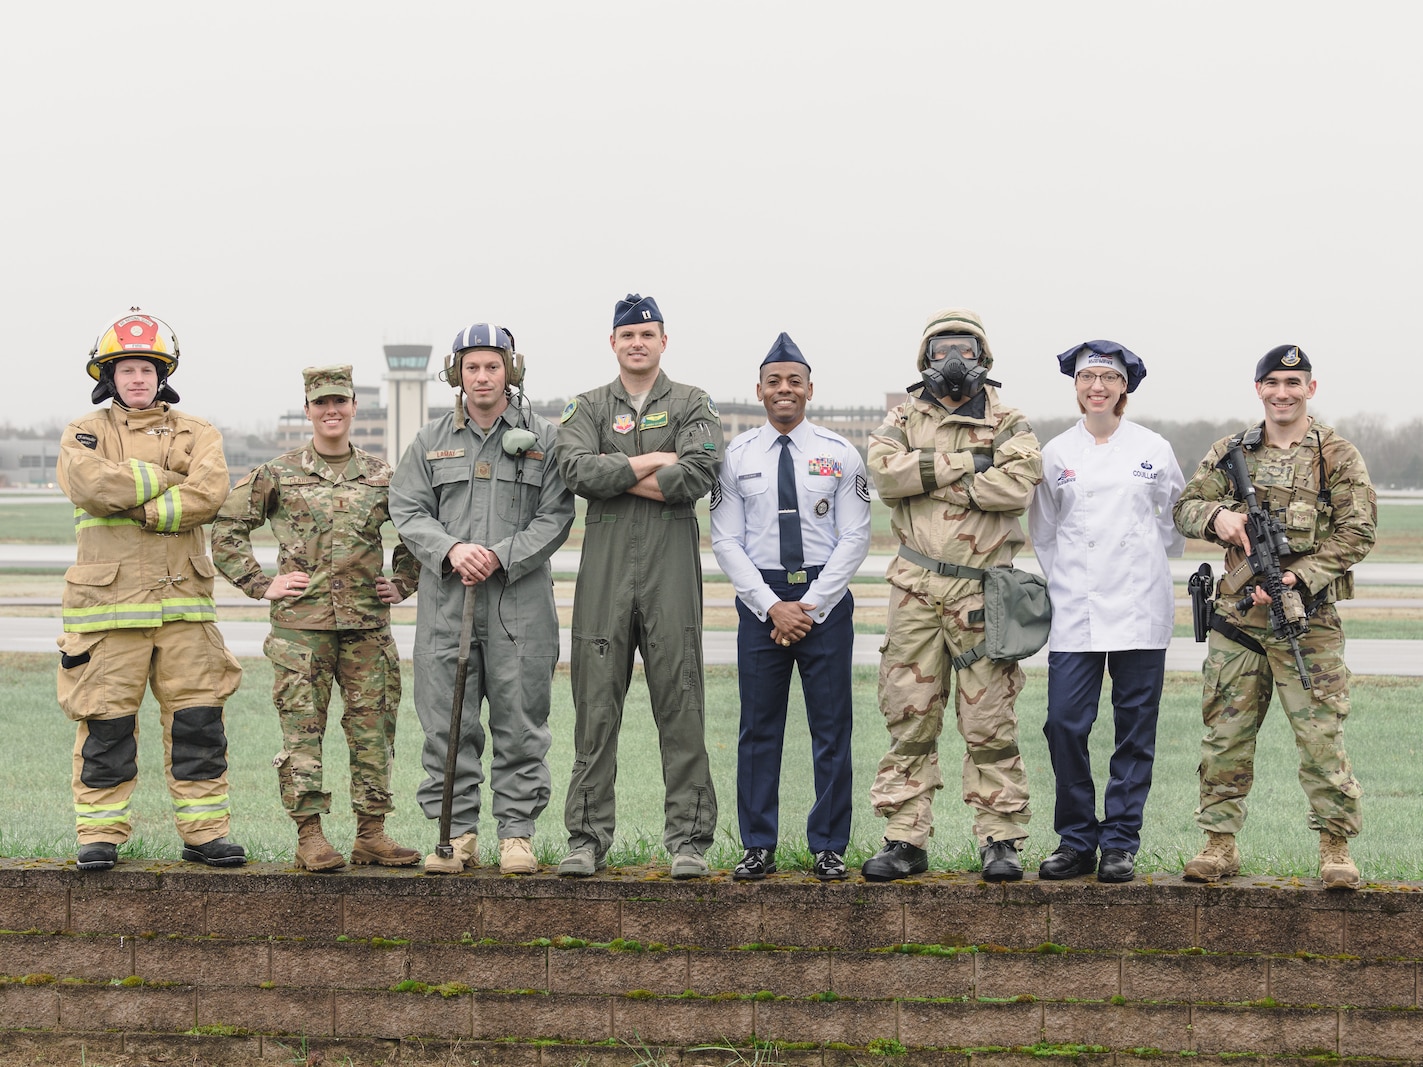 Photo of Members of the Vermont Air National Guard standing in front of the Burlington International Airport, South Burlington, Vt. April 28, 2022. The members represent various Air Force Specialty Codes (AFSCs), or jobs, available in the Vermont Air National Guard. (US Air Force photo by Senior Master Sgt. Michael Davis)